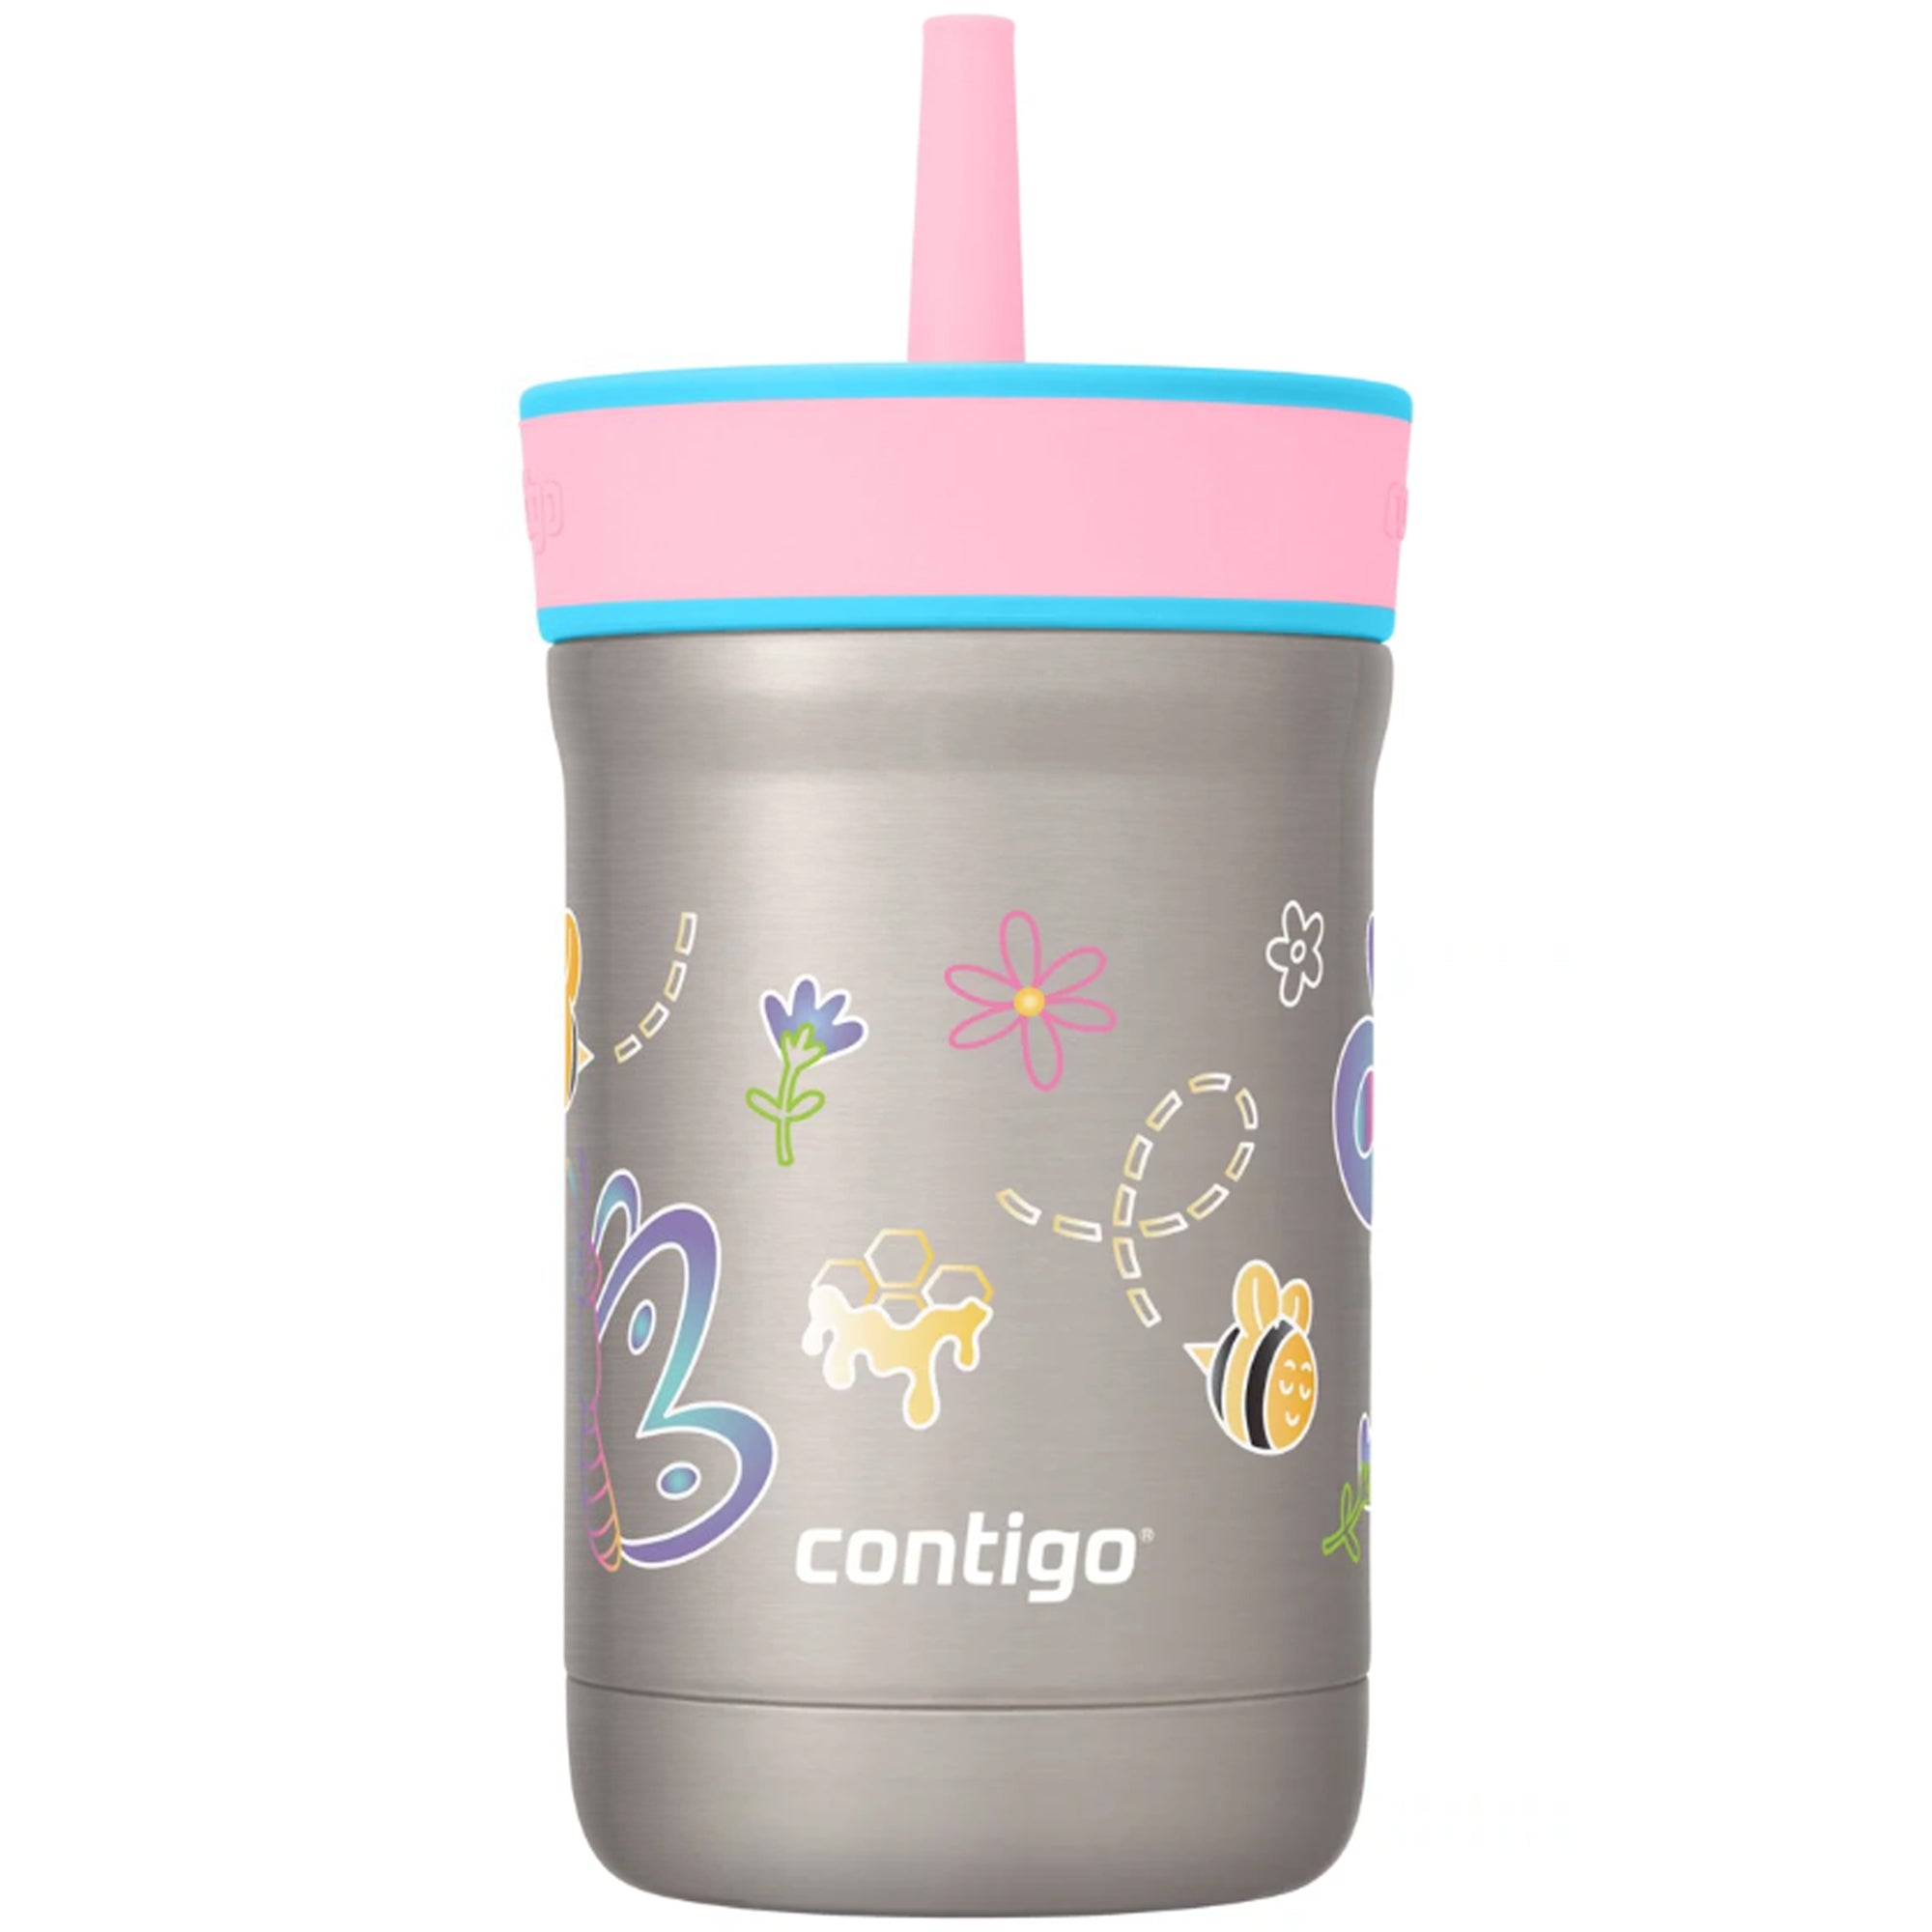 Contigo 12 oz. Kid's Spill-Proof Insulated Stainless Steel Tumbler with Straw Cosmos